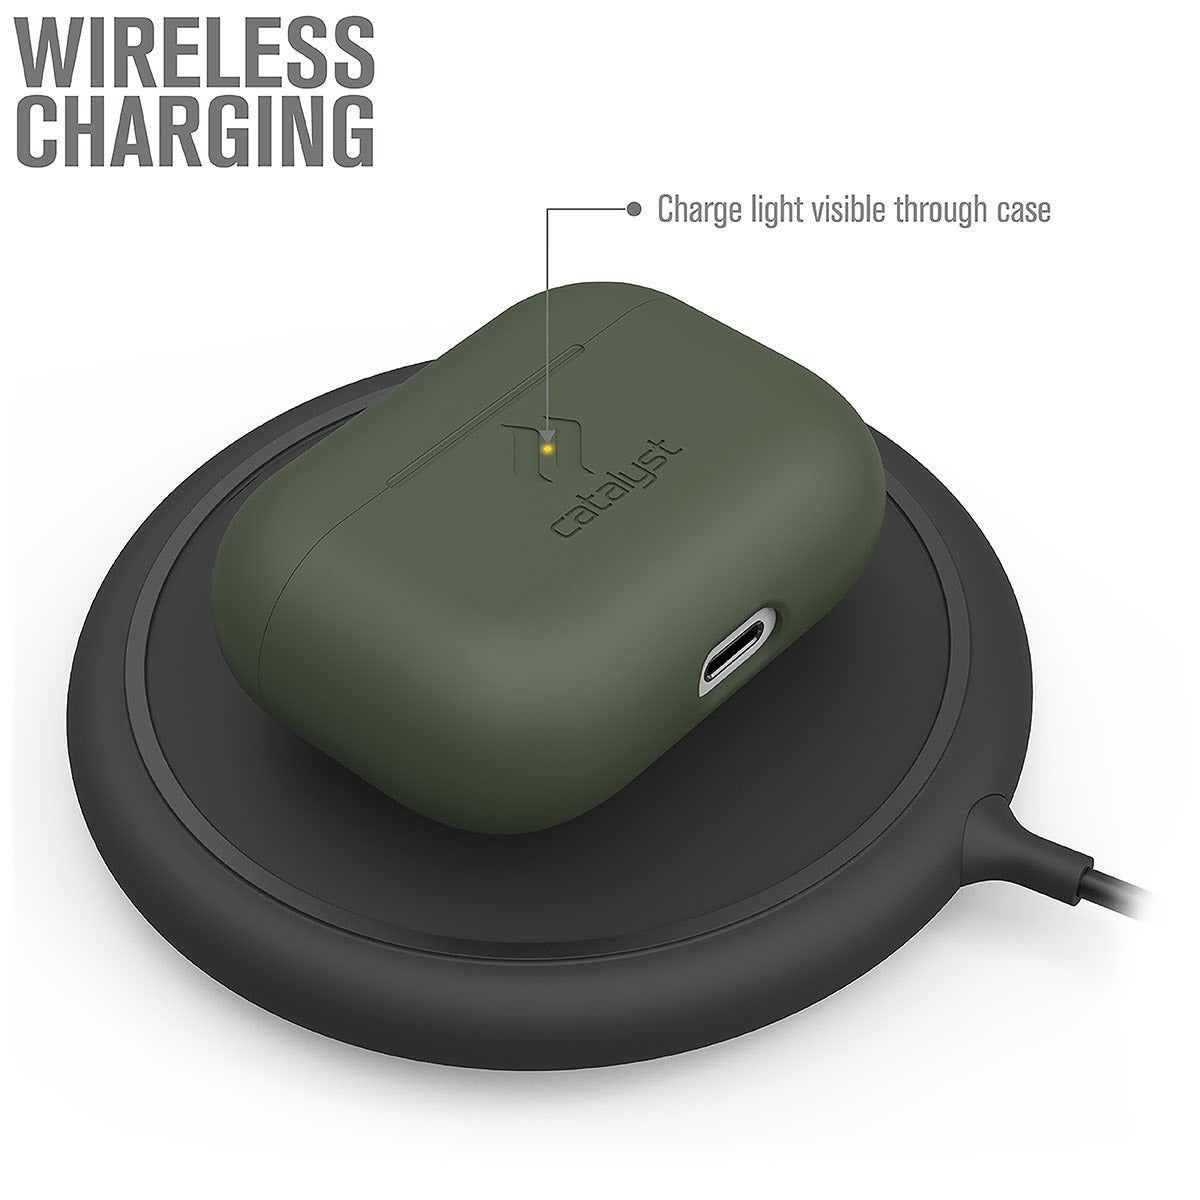 Catalyst airpods pro gen 2/1 slim case showing wireless charging of the case in an army green colorway